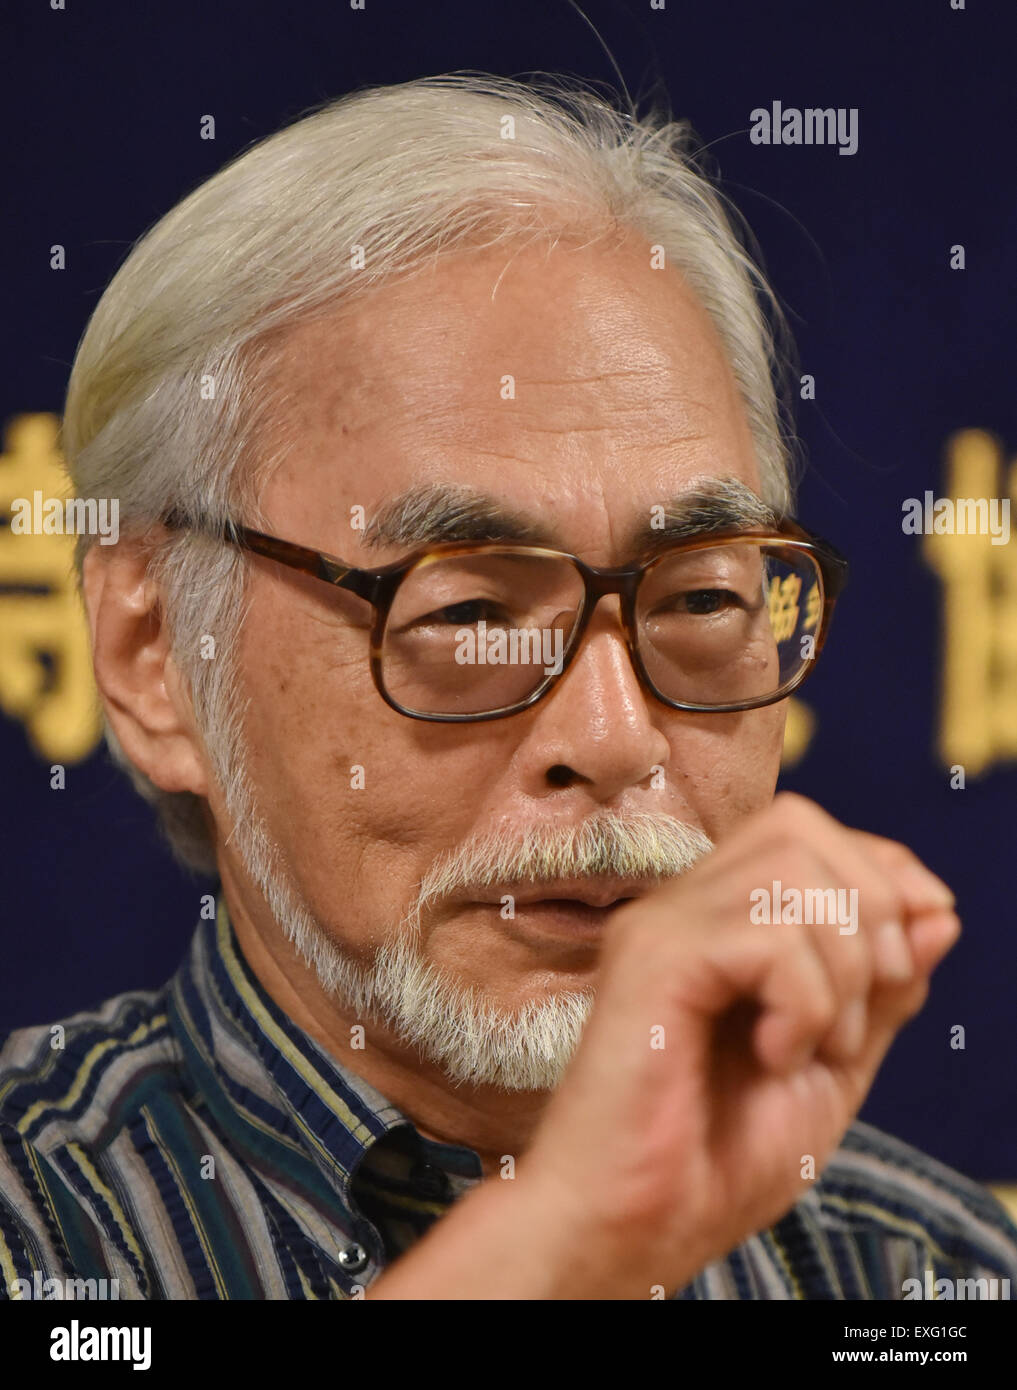 Tokyo, Japan. 13th July, 2015. Japan's Oscar-awarded animator Hayao Miyazaki speaks at a press conference at the Foreign Correspondents' Club of Japan in Tokyo, Japan, on July 13, 2015. Hayao Miyazaki Monday urged the Japanese government to follow the country 's 70-year pacifism since the end of World War II by dropping a plan to build a replacement within Okinawa for a controversial U.S. airbase and a security-related legislation package to allow Japan' s defense forces to exercising the right to collective defense. © Foreign Correspondents' Club of Japan/Xinhua/Alamy Live News Stock Photo